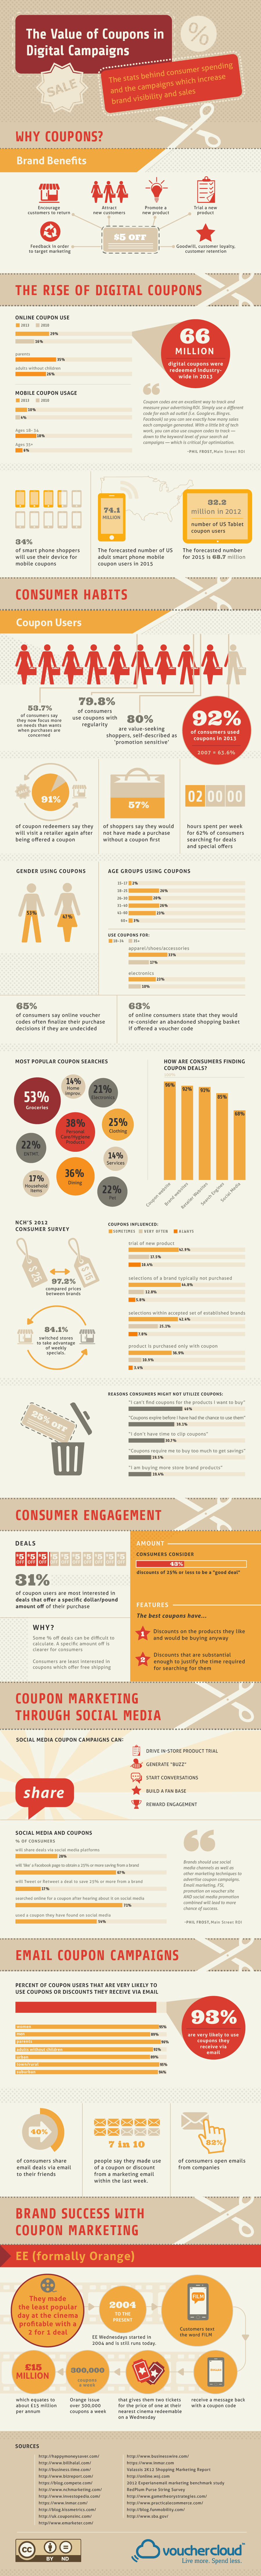 The Rise of Digital Coupons_Digital Marketing and Coupons_Infographic